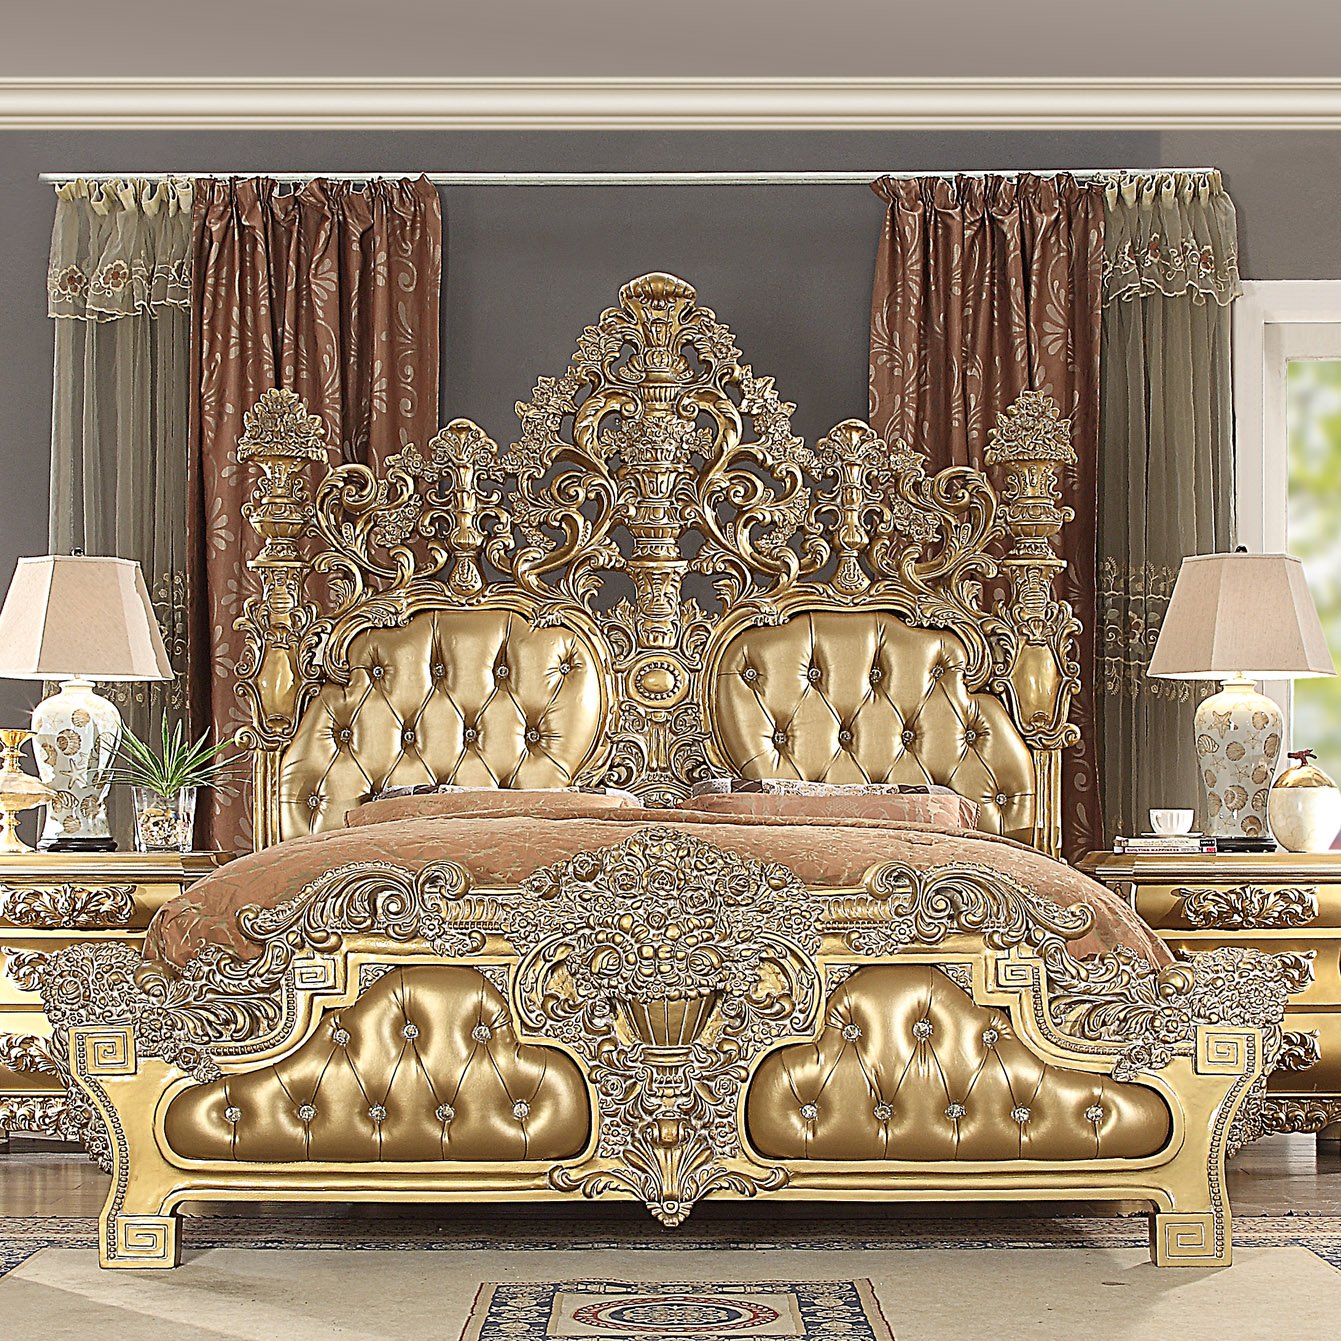 Leather Eastern King Bed in Metallic Bright Gold Finish 8016EKBED European